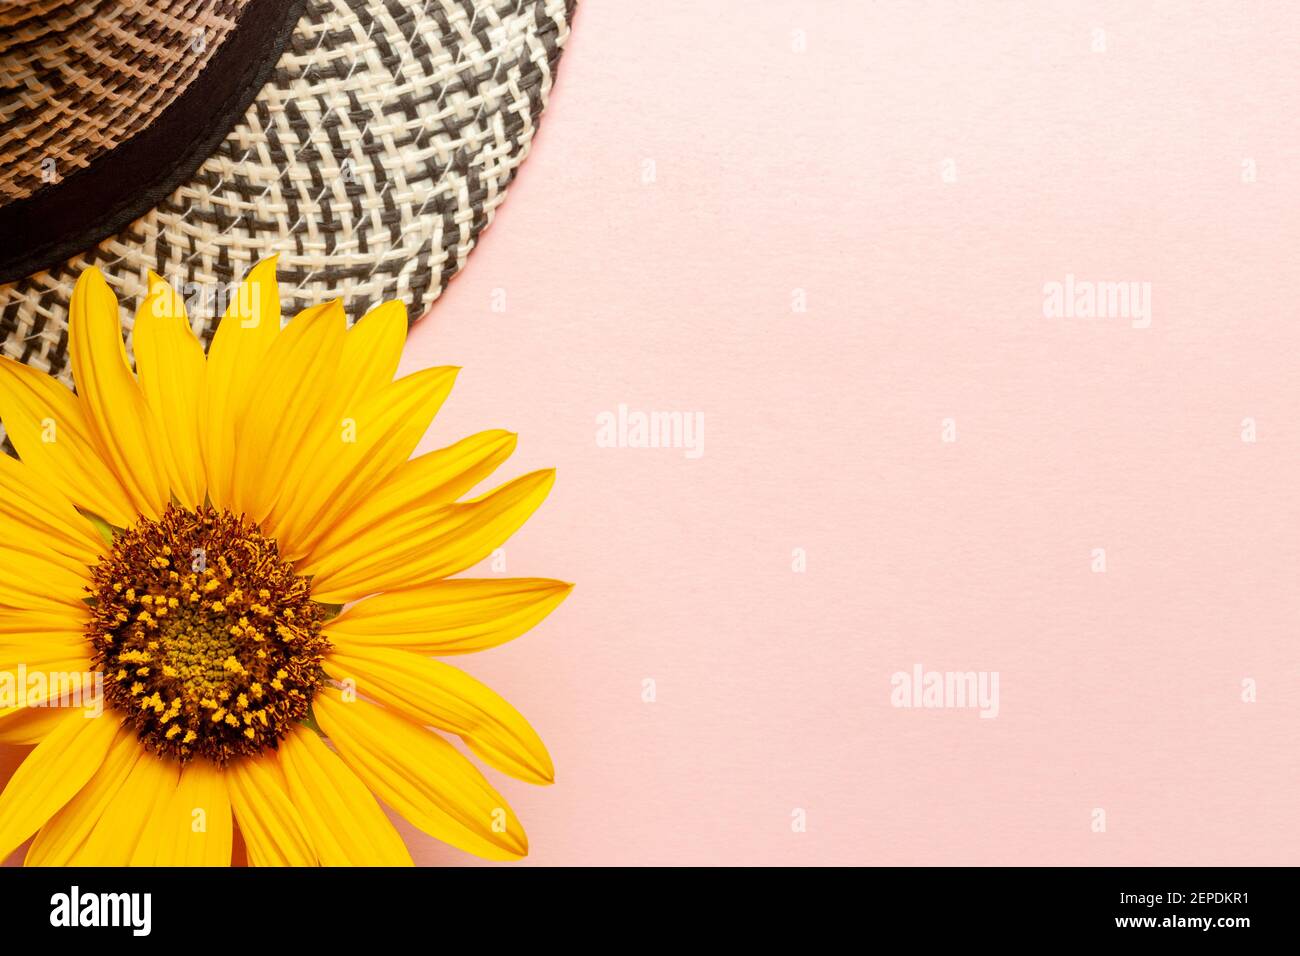 summer template mockup with hat and sunflower on a pink background. copy space Stock Photo